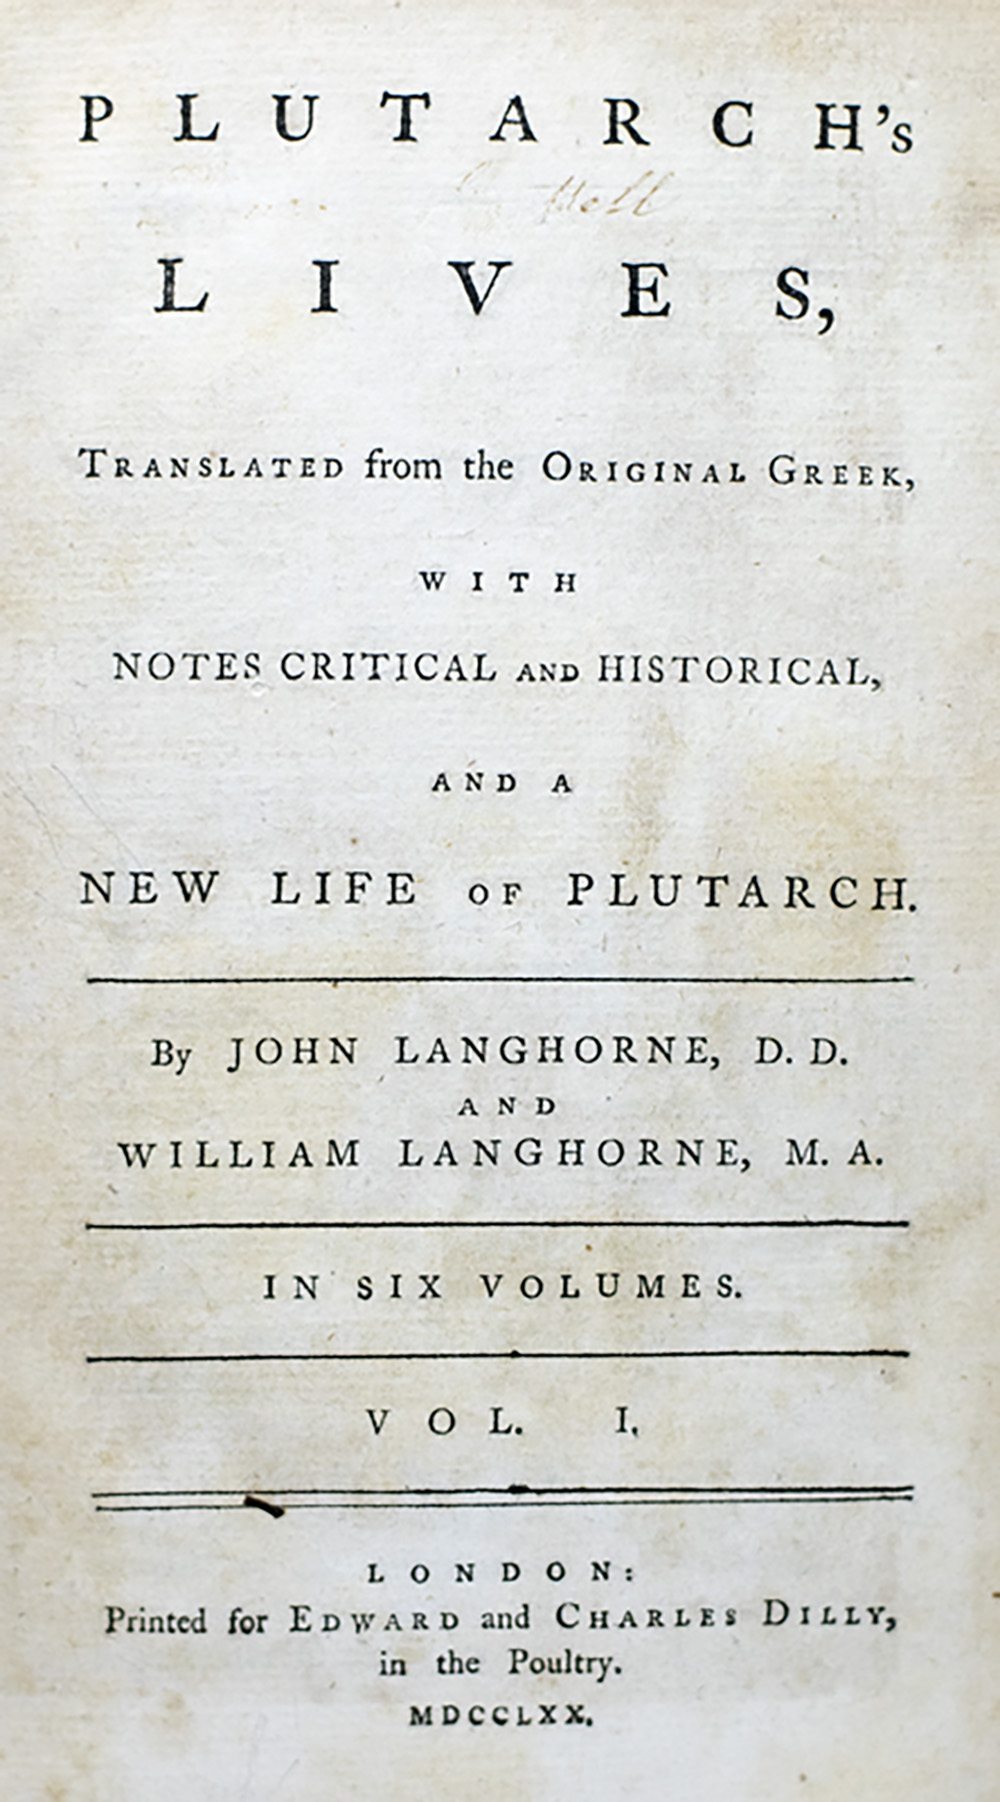 biography of plutarch